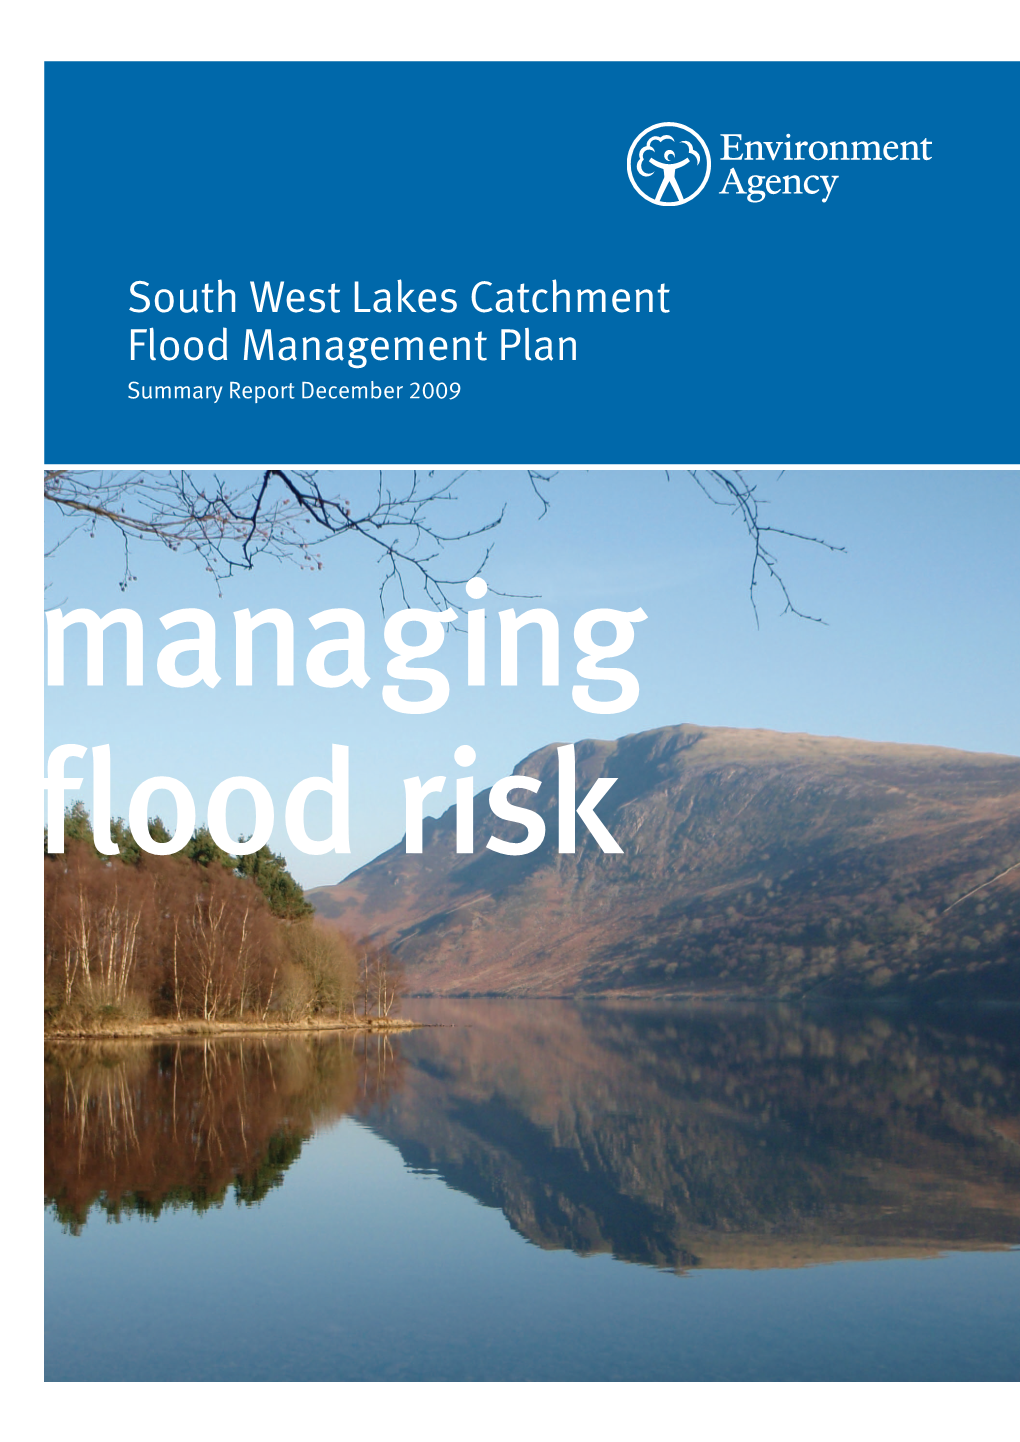 South West Lakes Catchment Flood Management Plan Summary Report December 2009 Managing Flood Risk We Are the Environment Agency